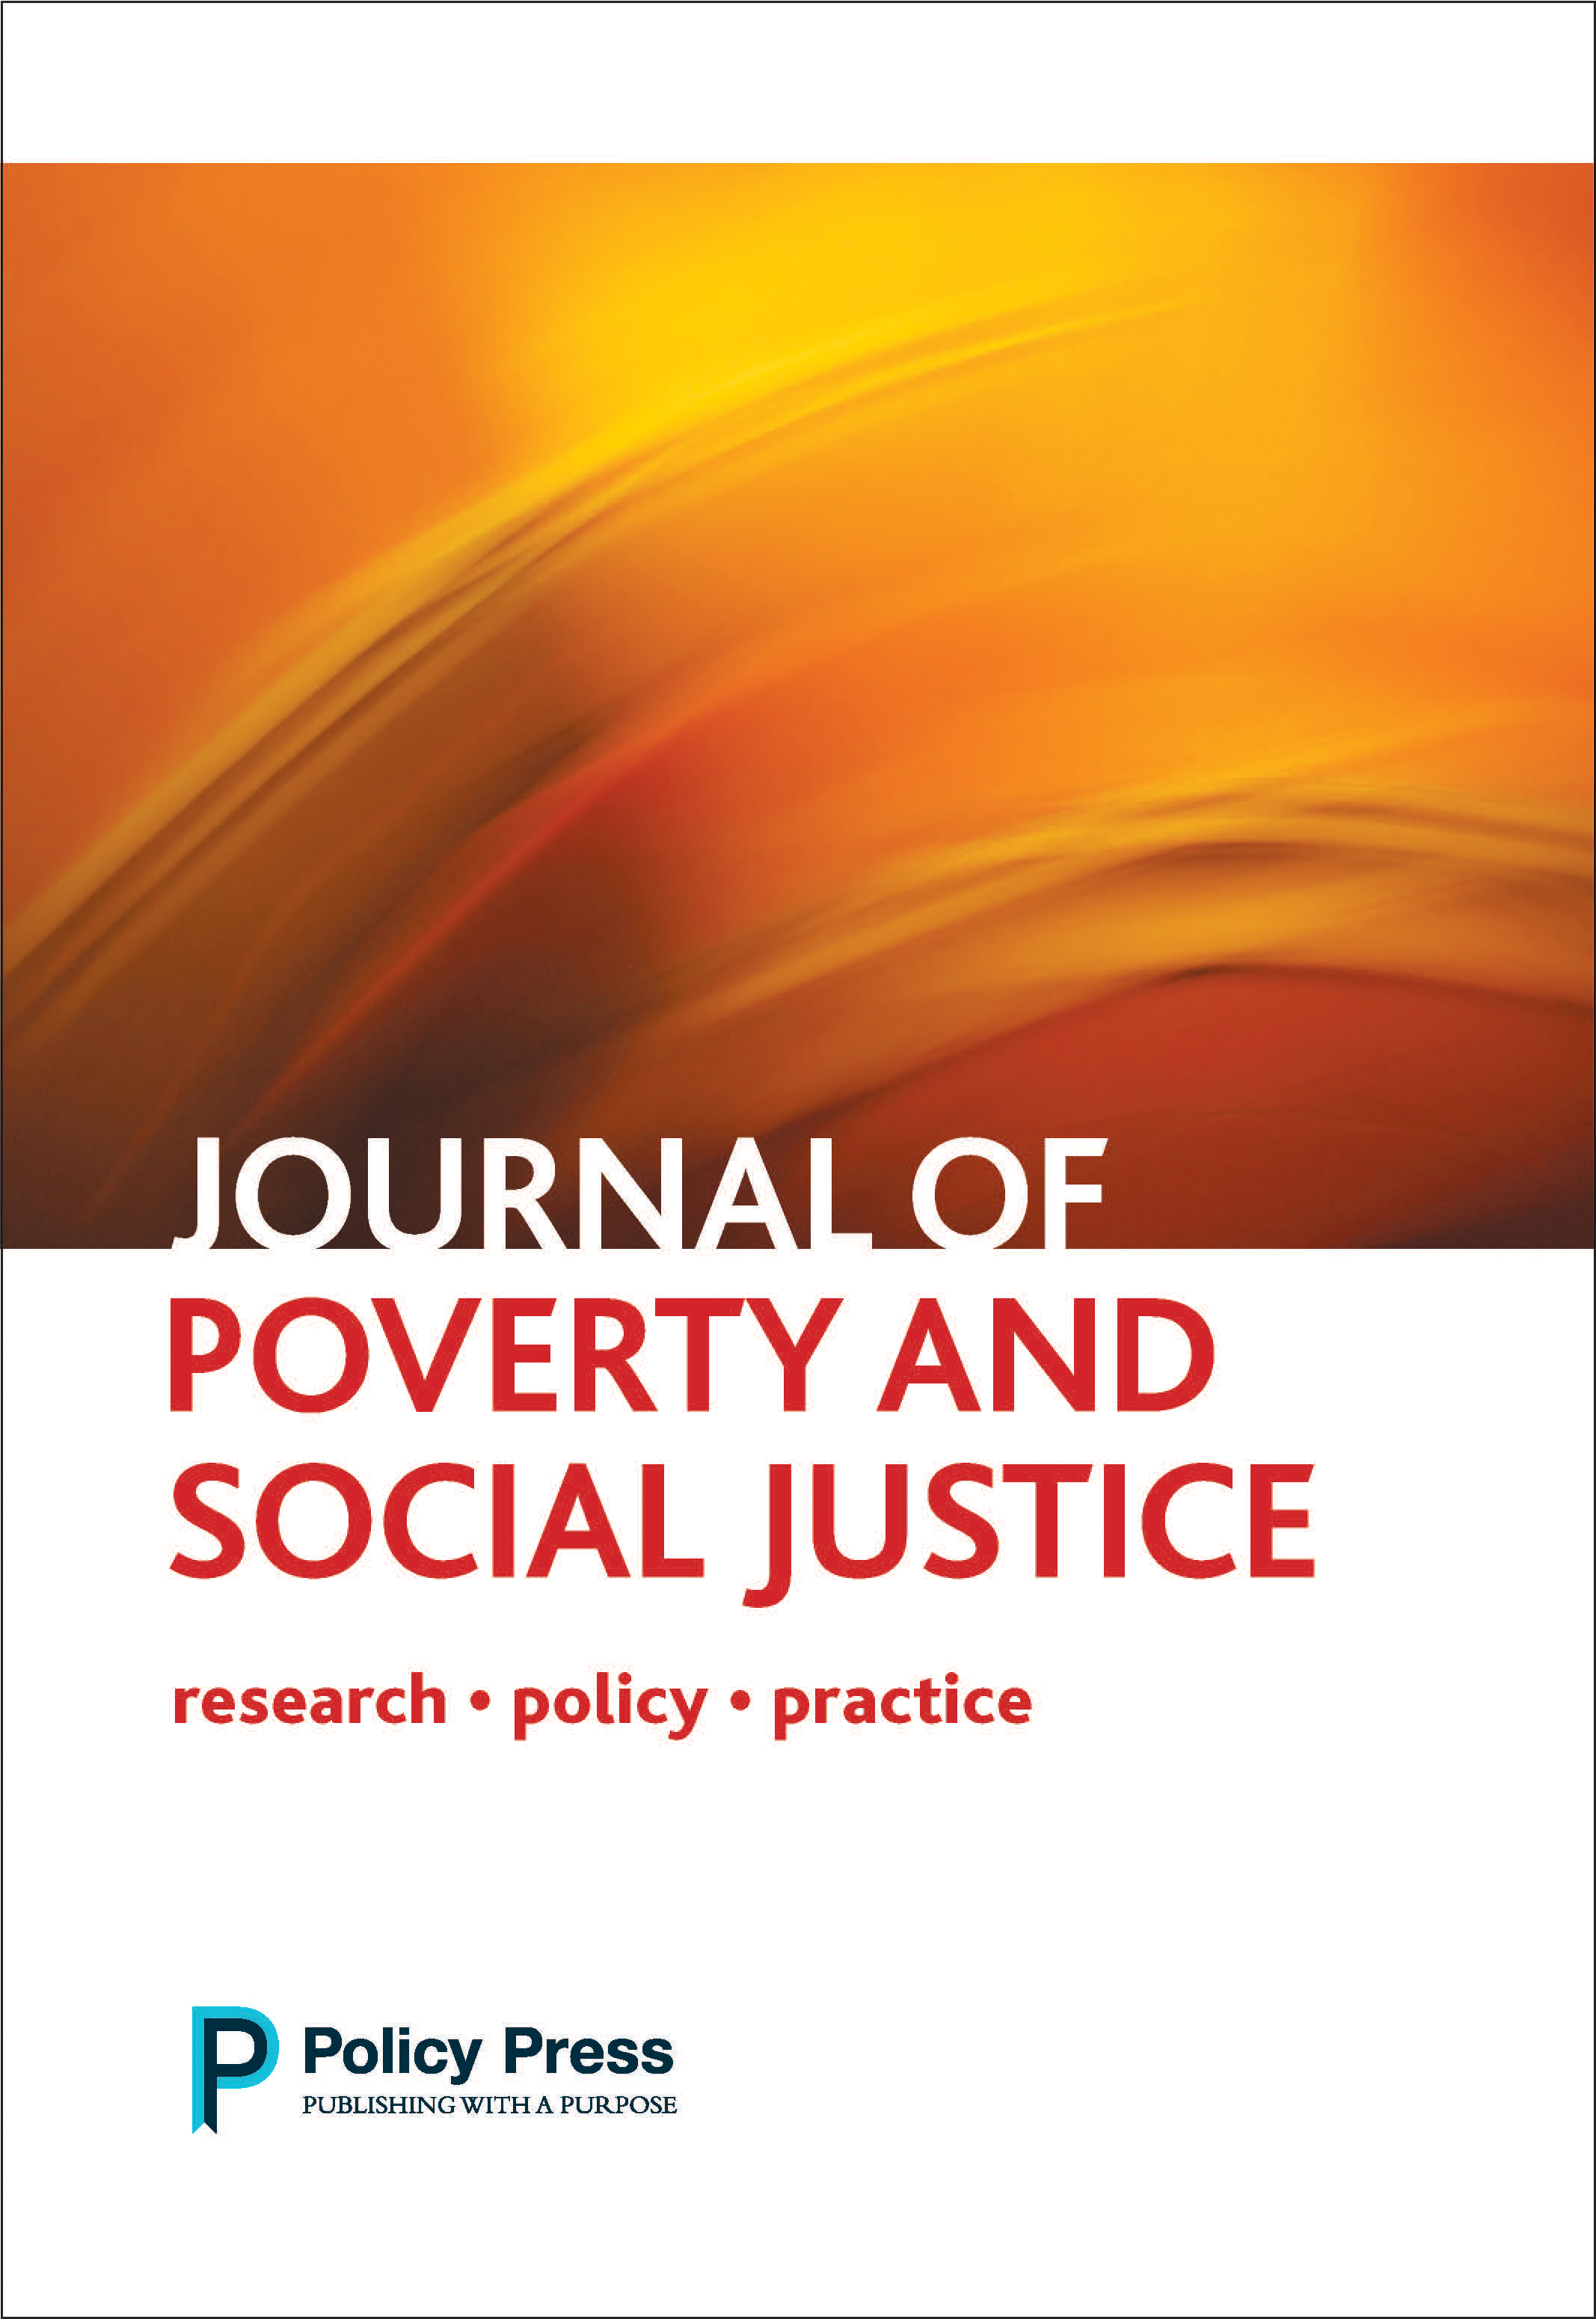 Introducing the new Editors of the Journal of Poverty and Social Justice